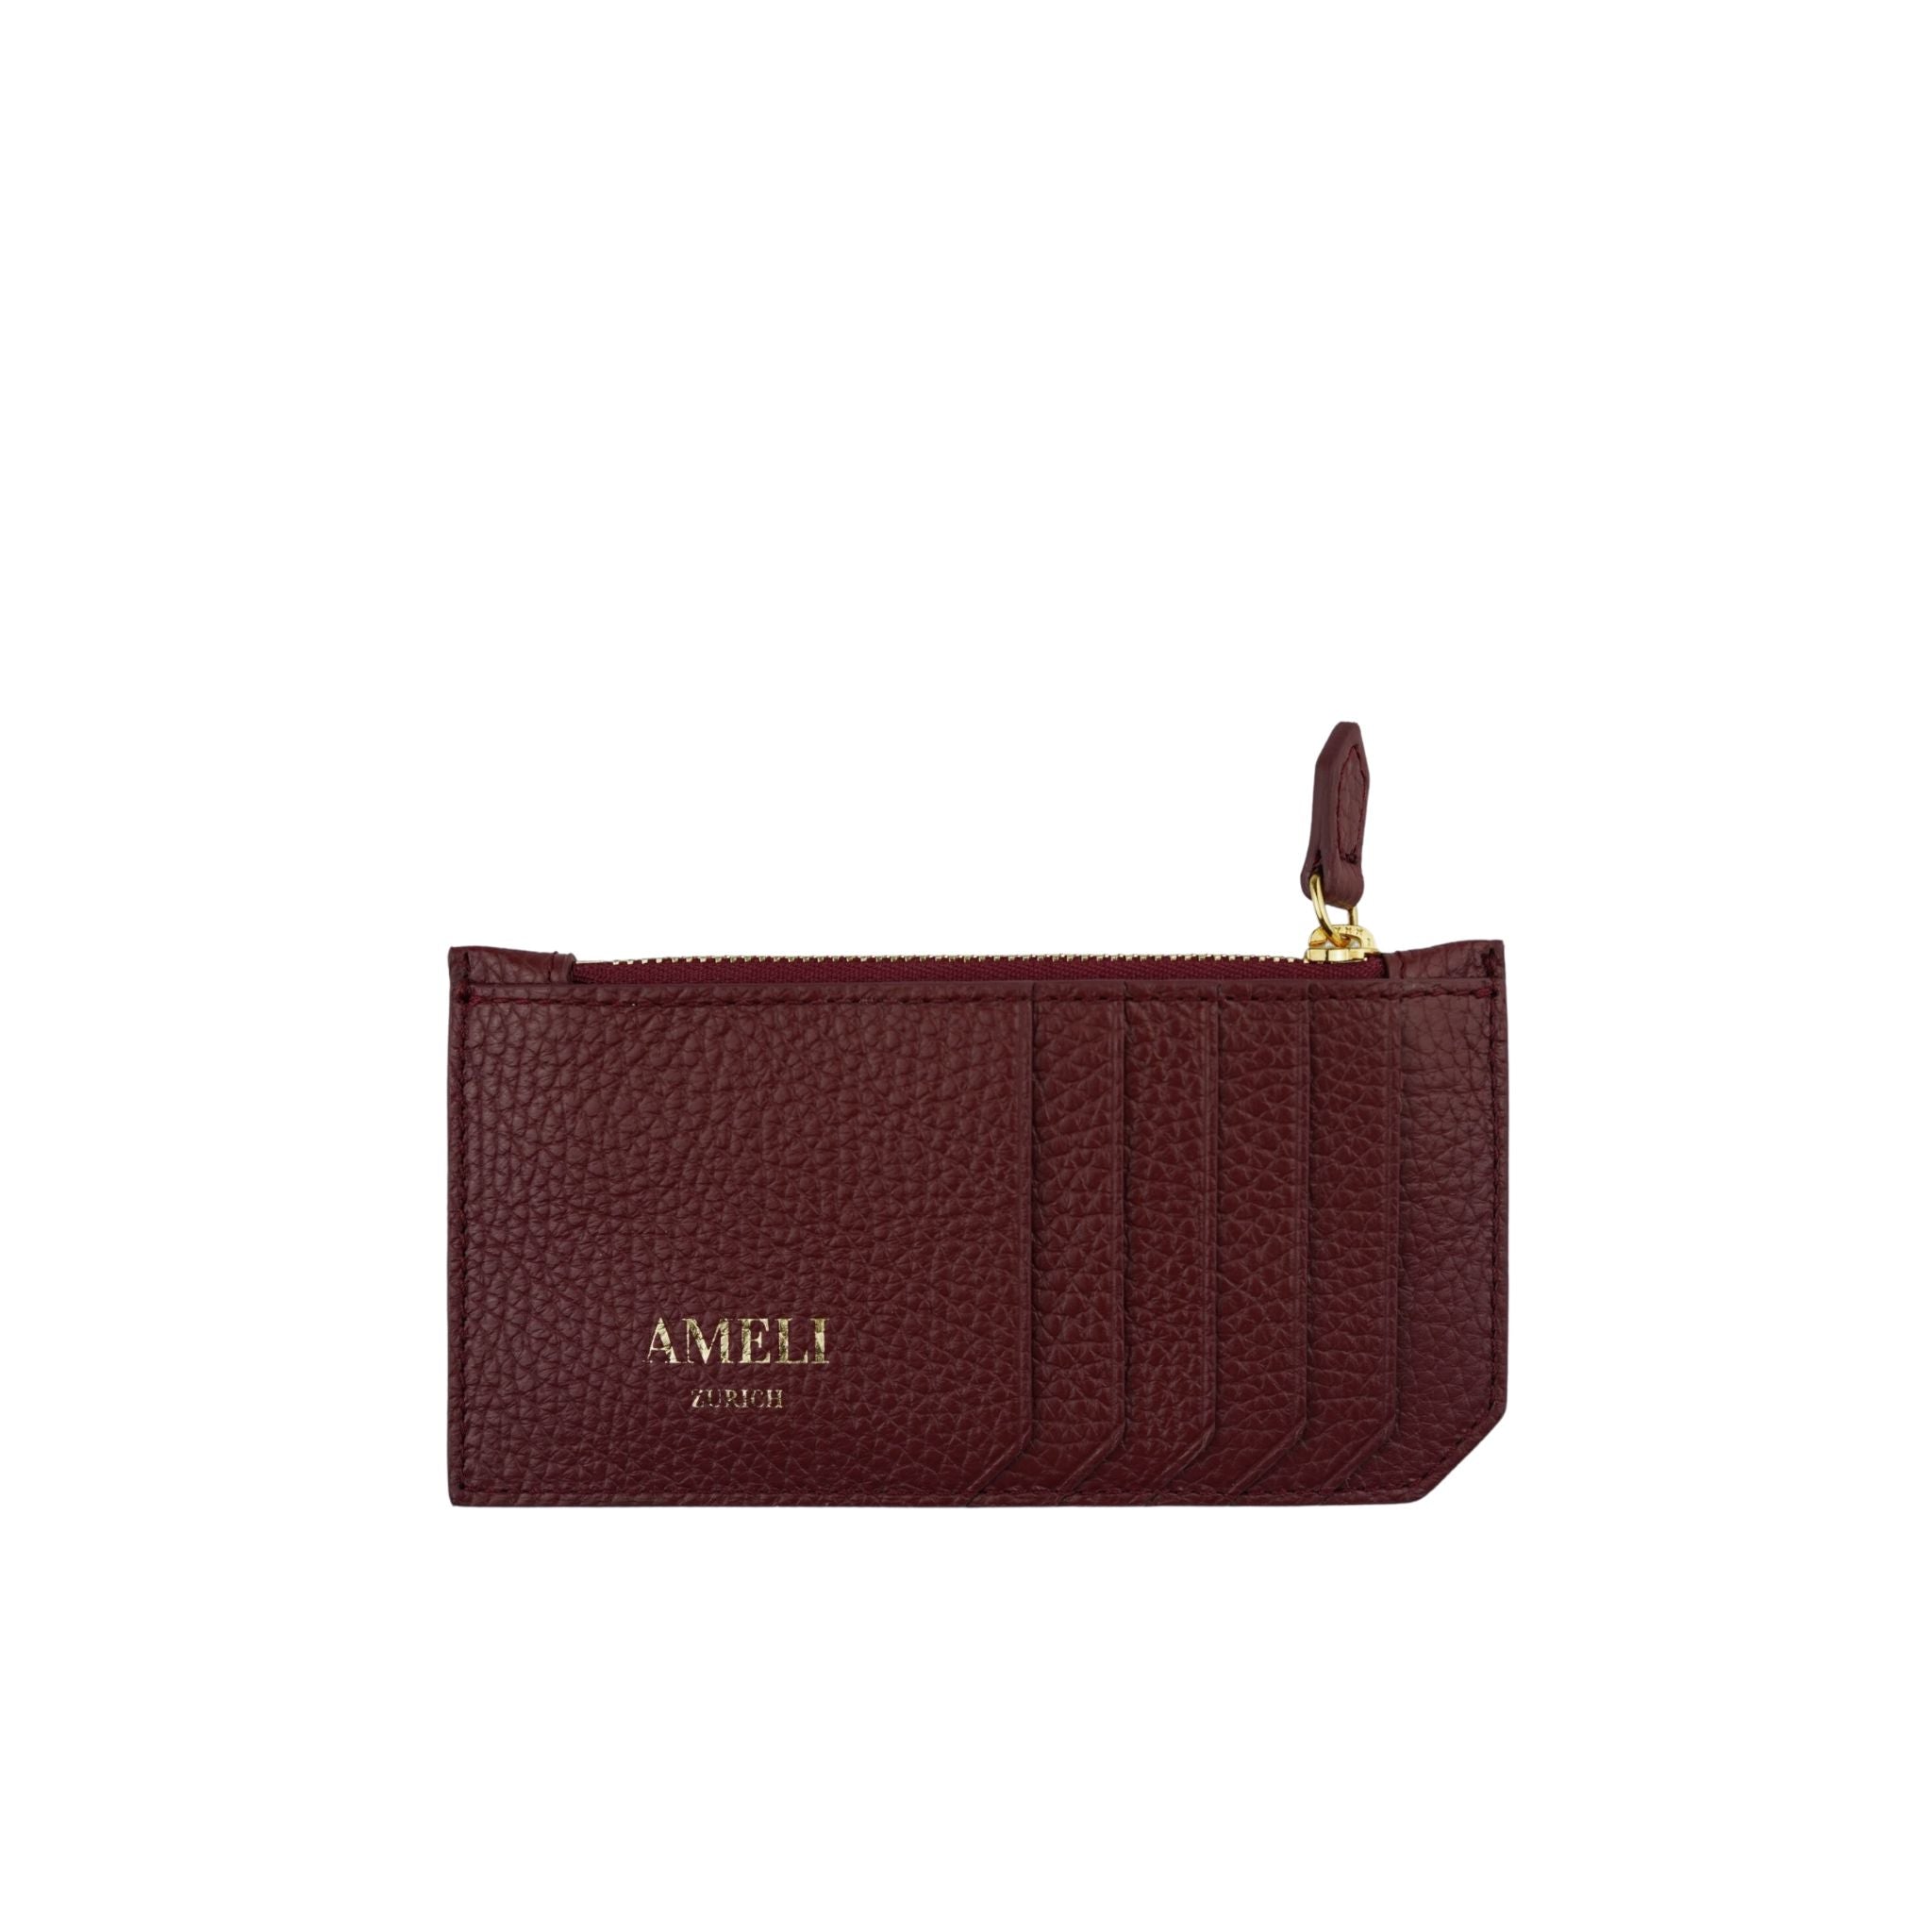 AMELI Zurich | Cardholder | Maroon Red | Soft Grain Leather | Front 